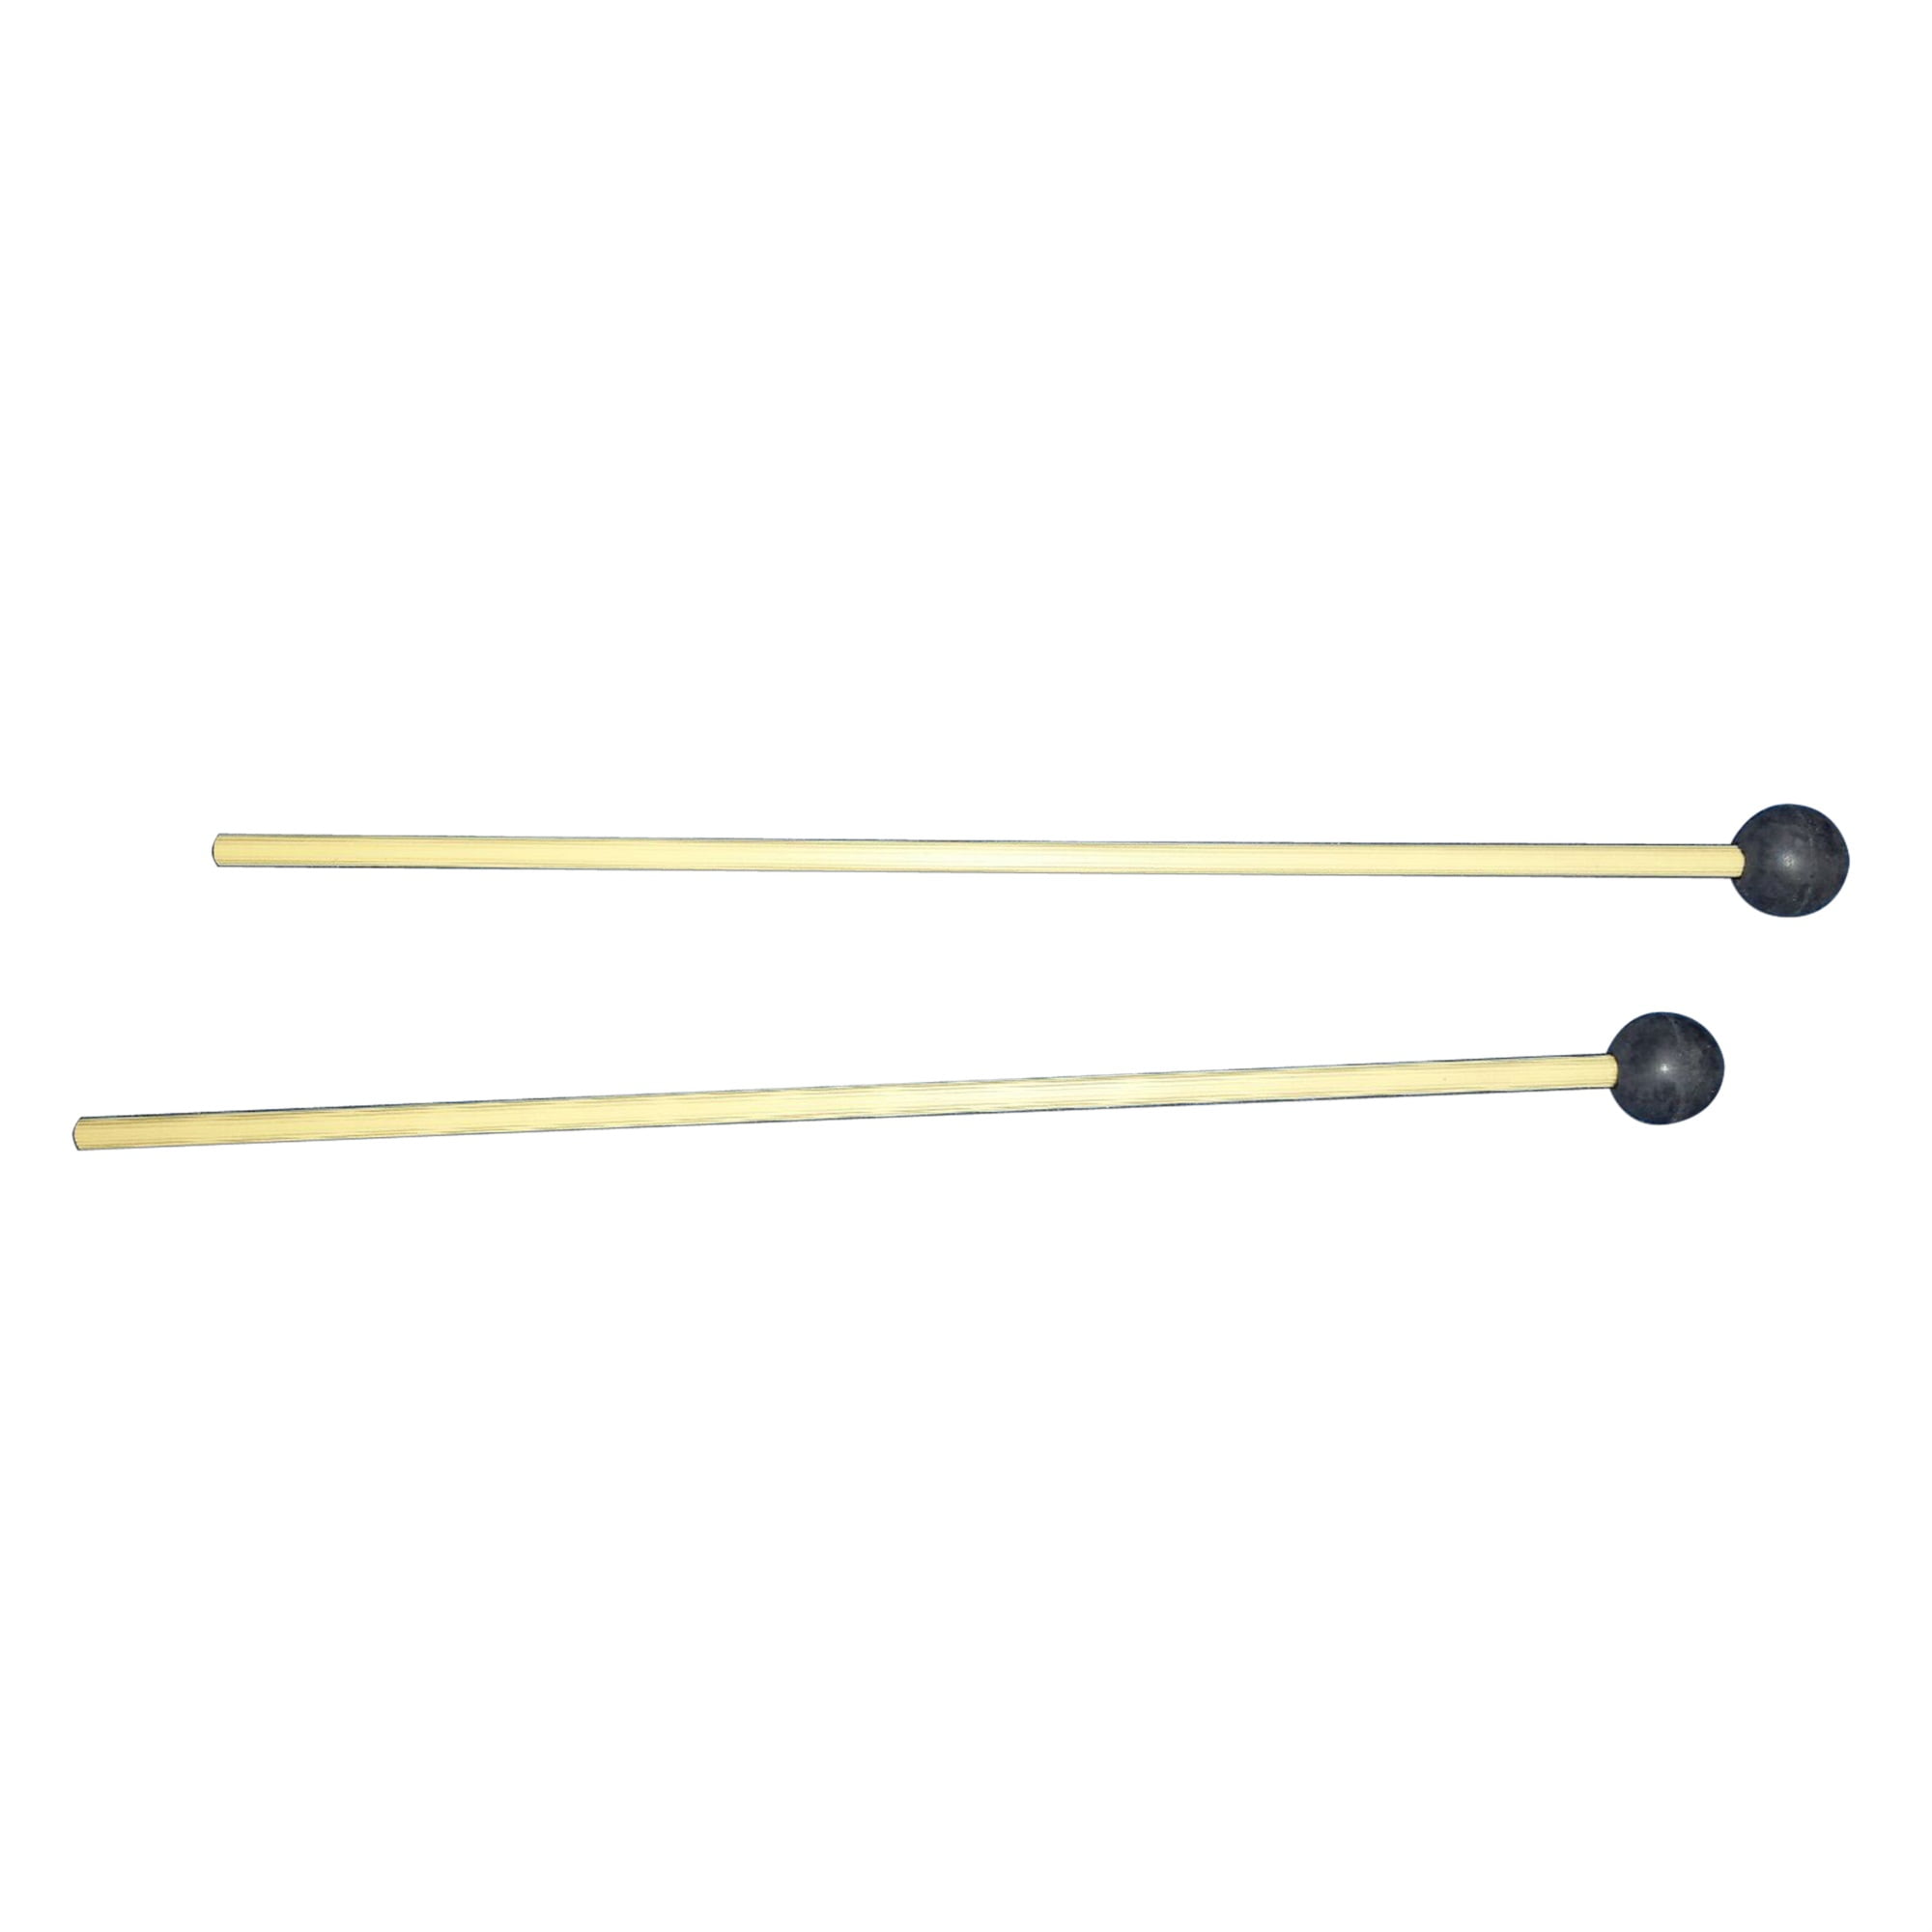 3/4 Diameter Rhythm Band Abs Handle 4 count 2 Pack 8 1/2 Long RB2315 Medium-Density Rubber Mallets 